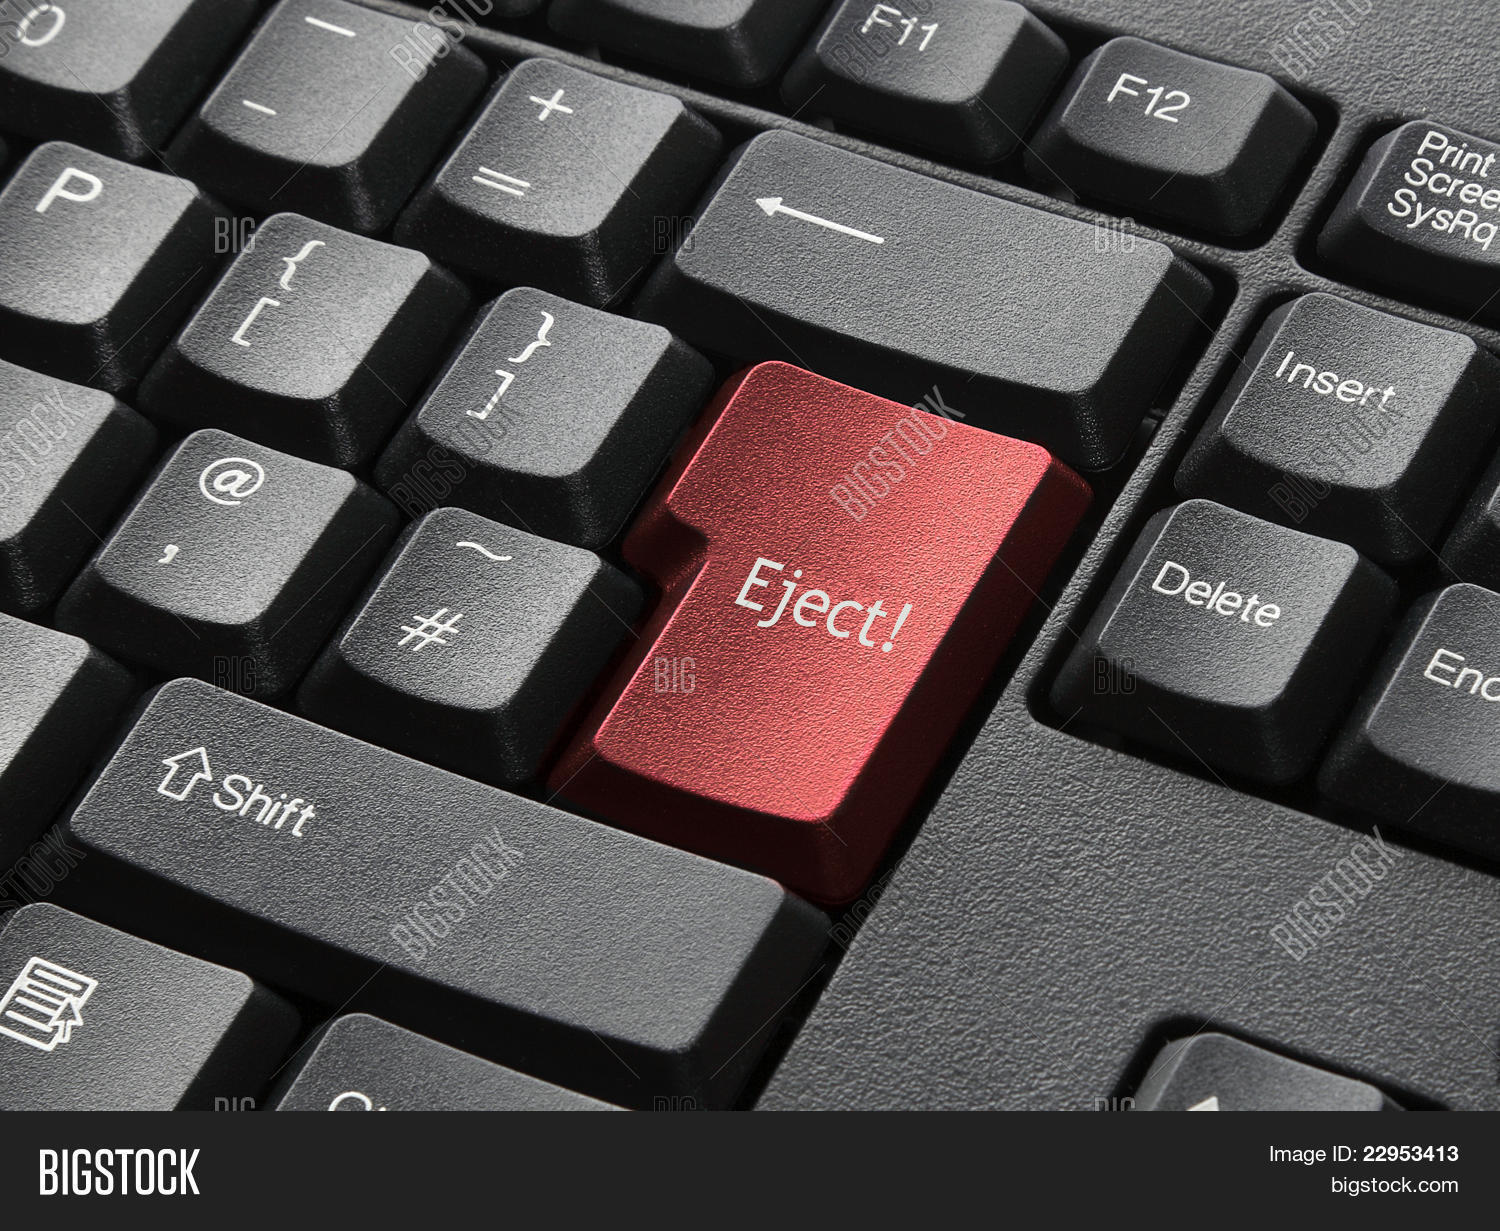 eject button on windows keyboard for mac